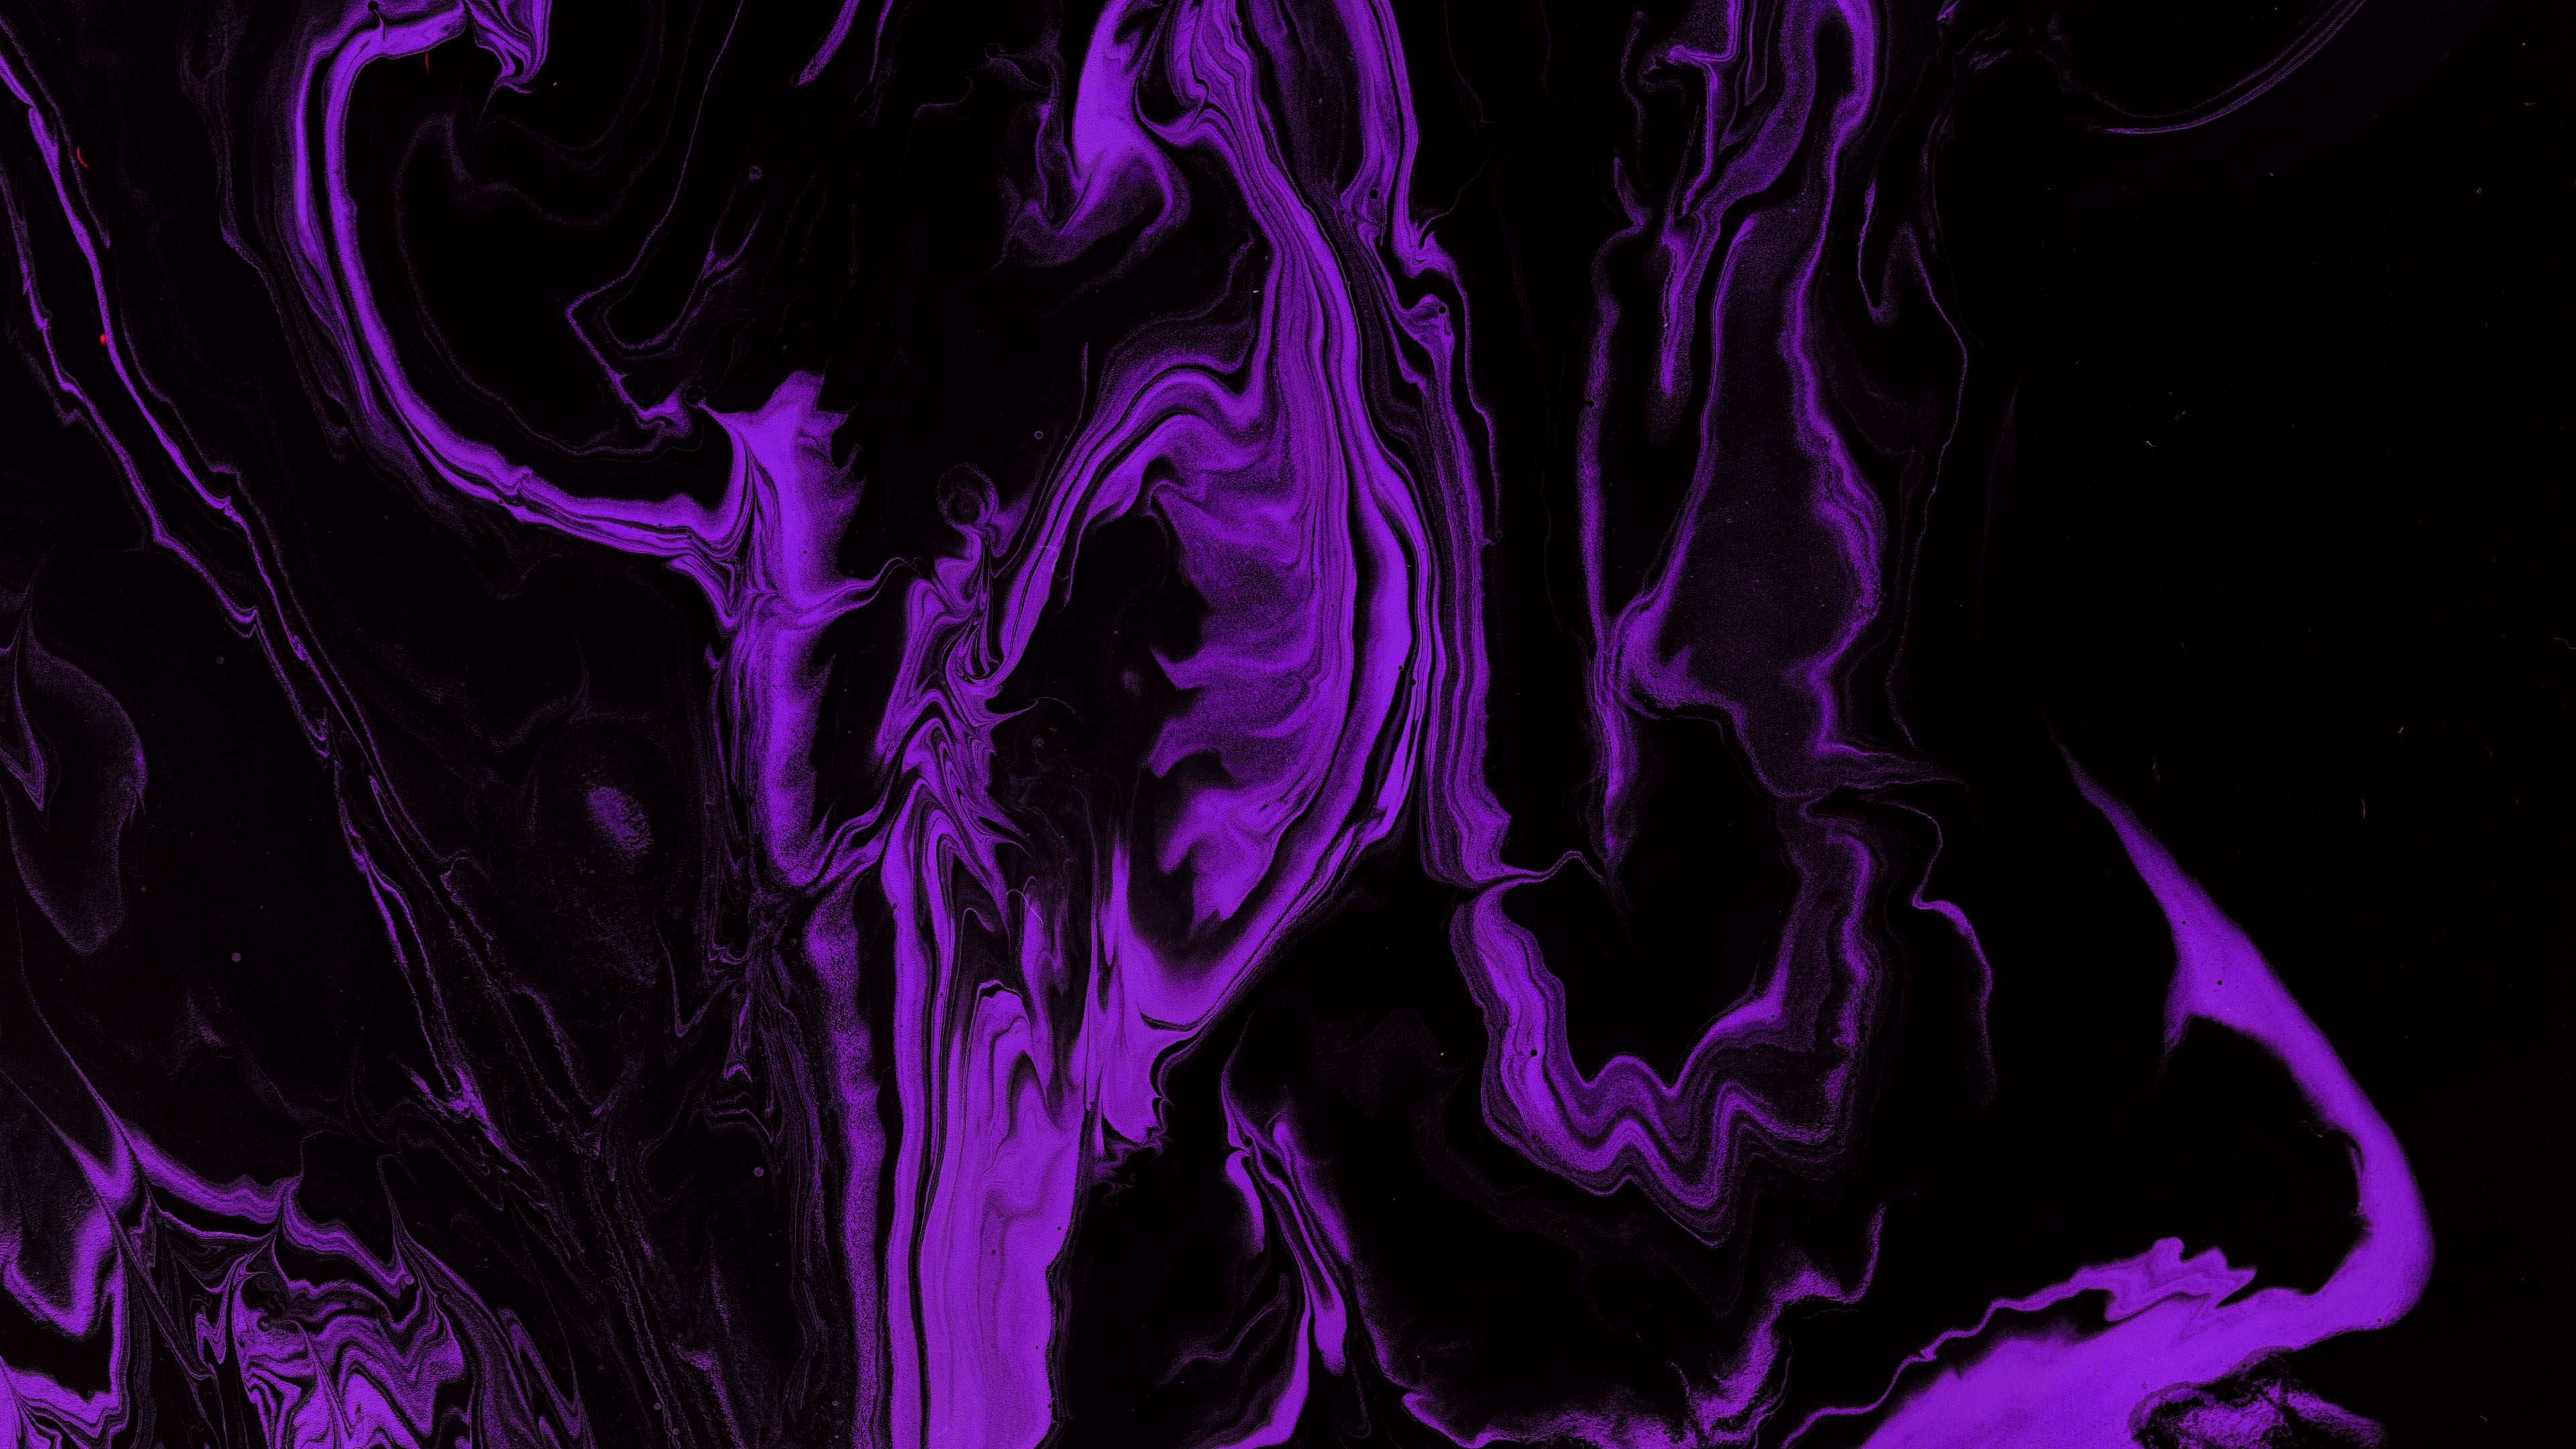 pink and black abstract wallpaper